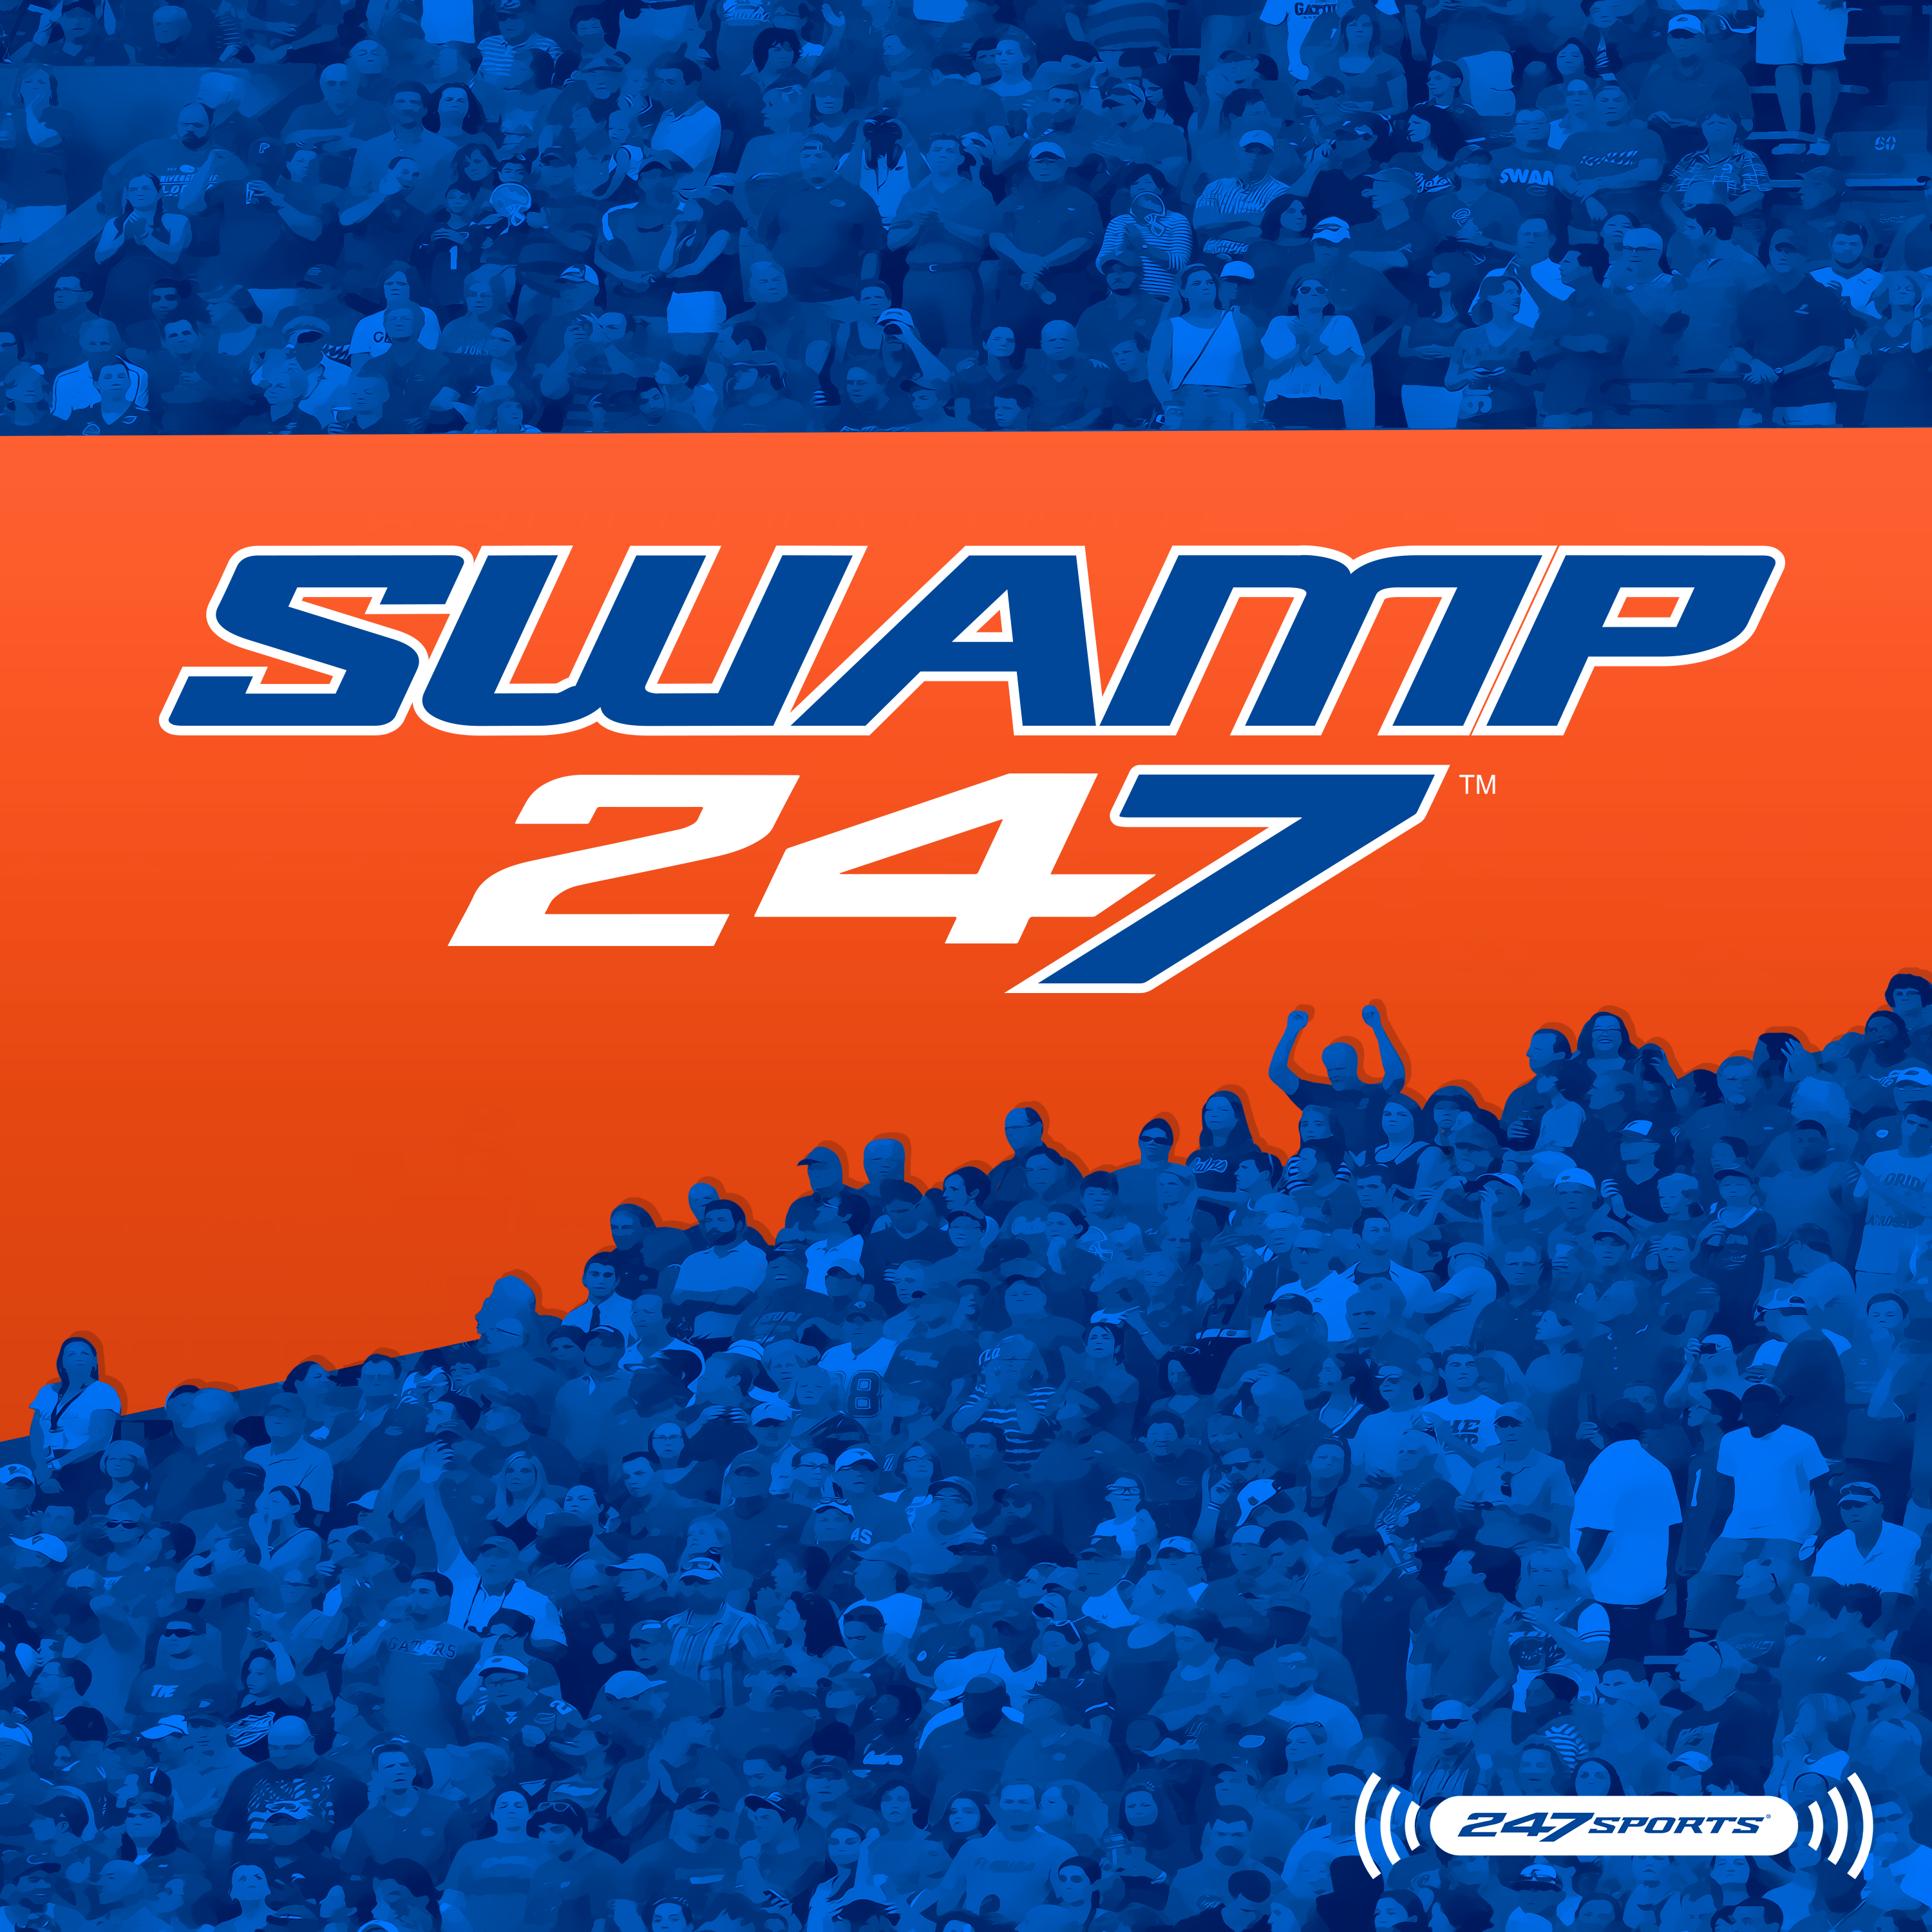 Swamp247 Podcast: A look at UF's recent transfer portal moves, and previewing an upcoming official visit